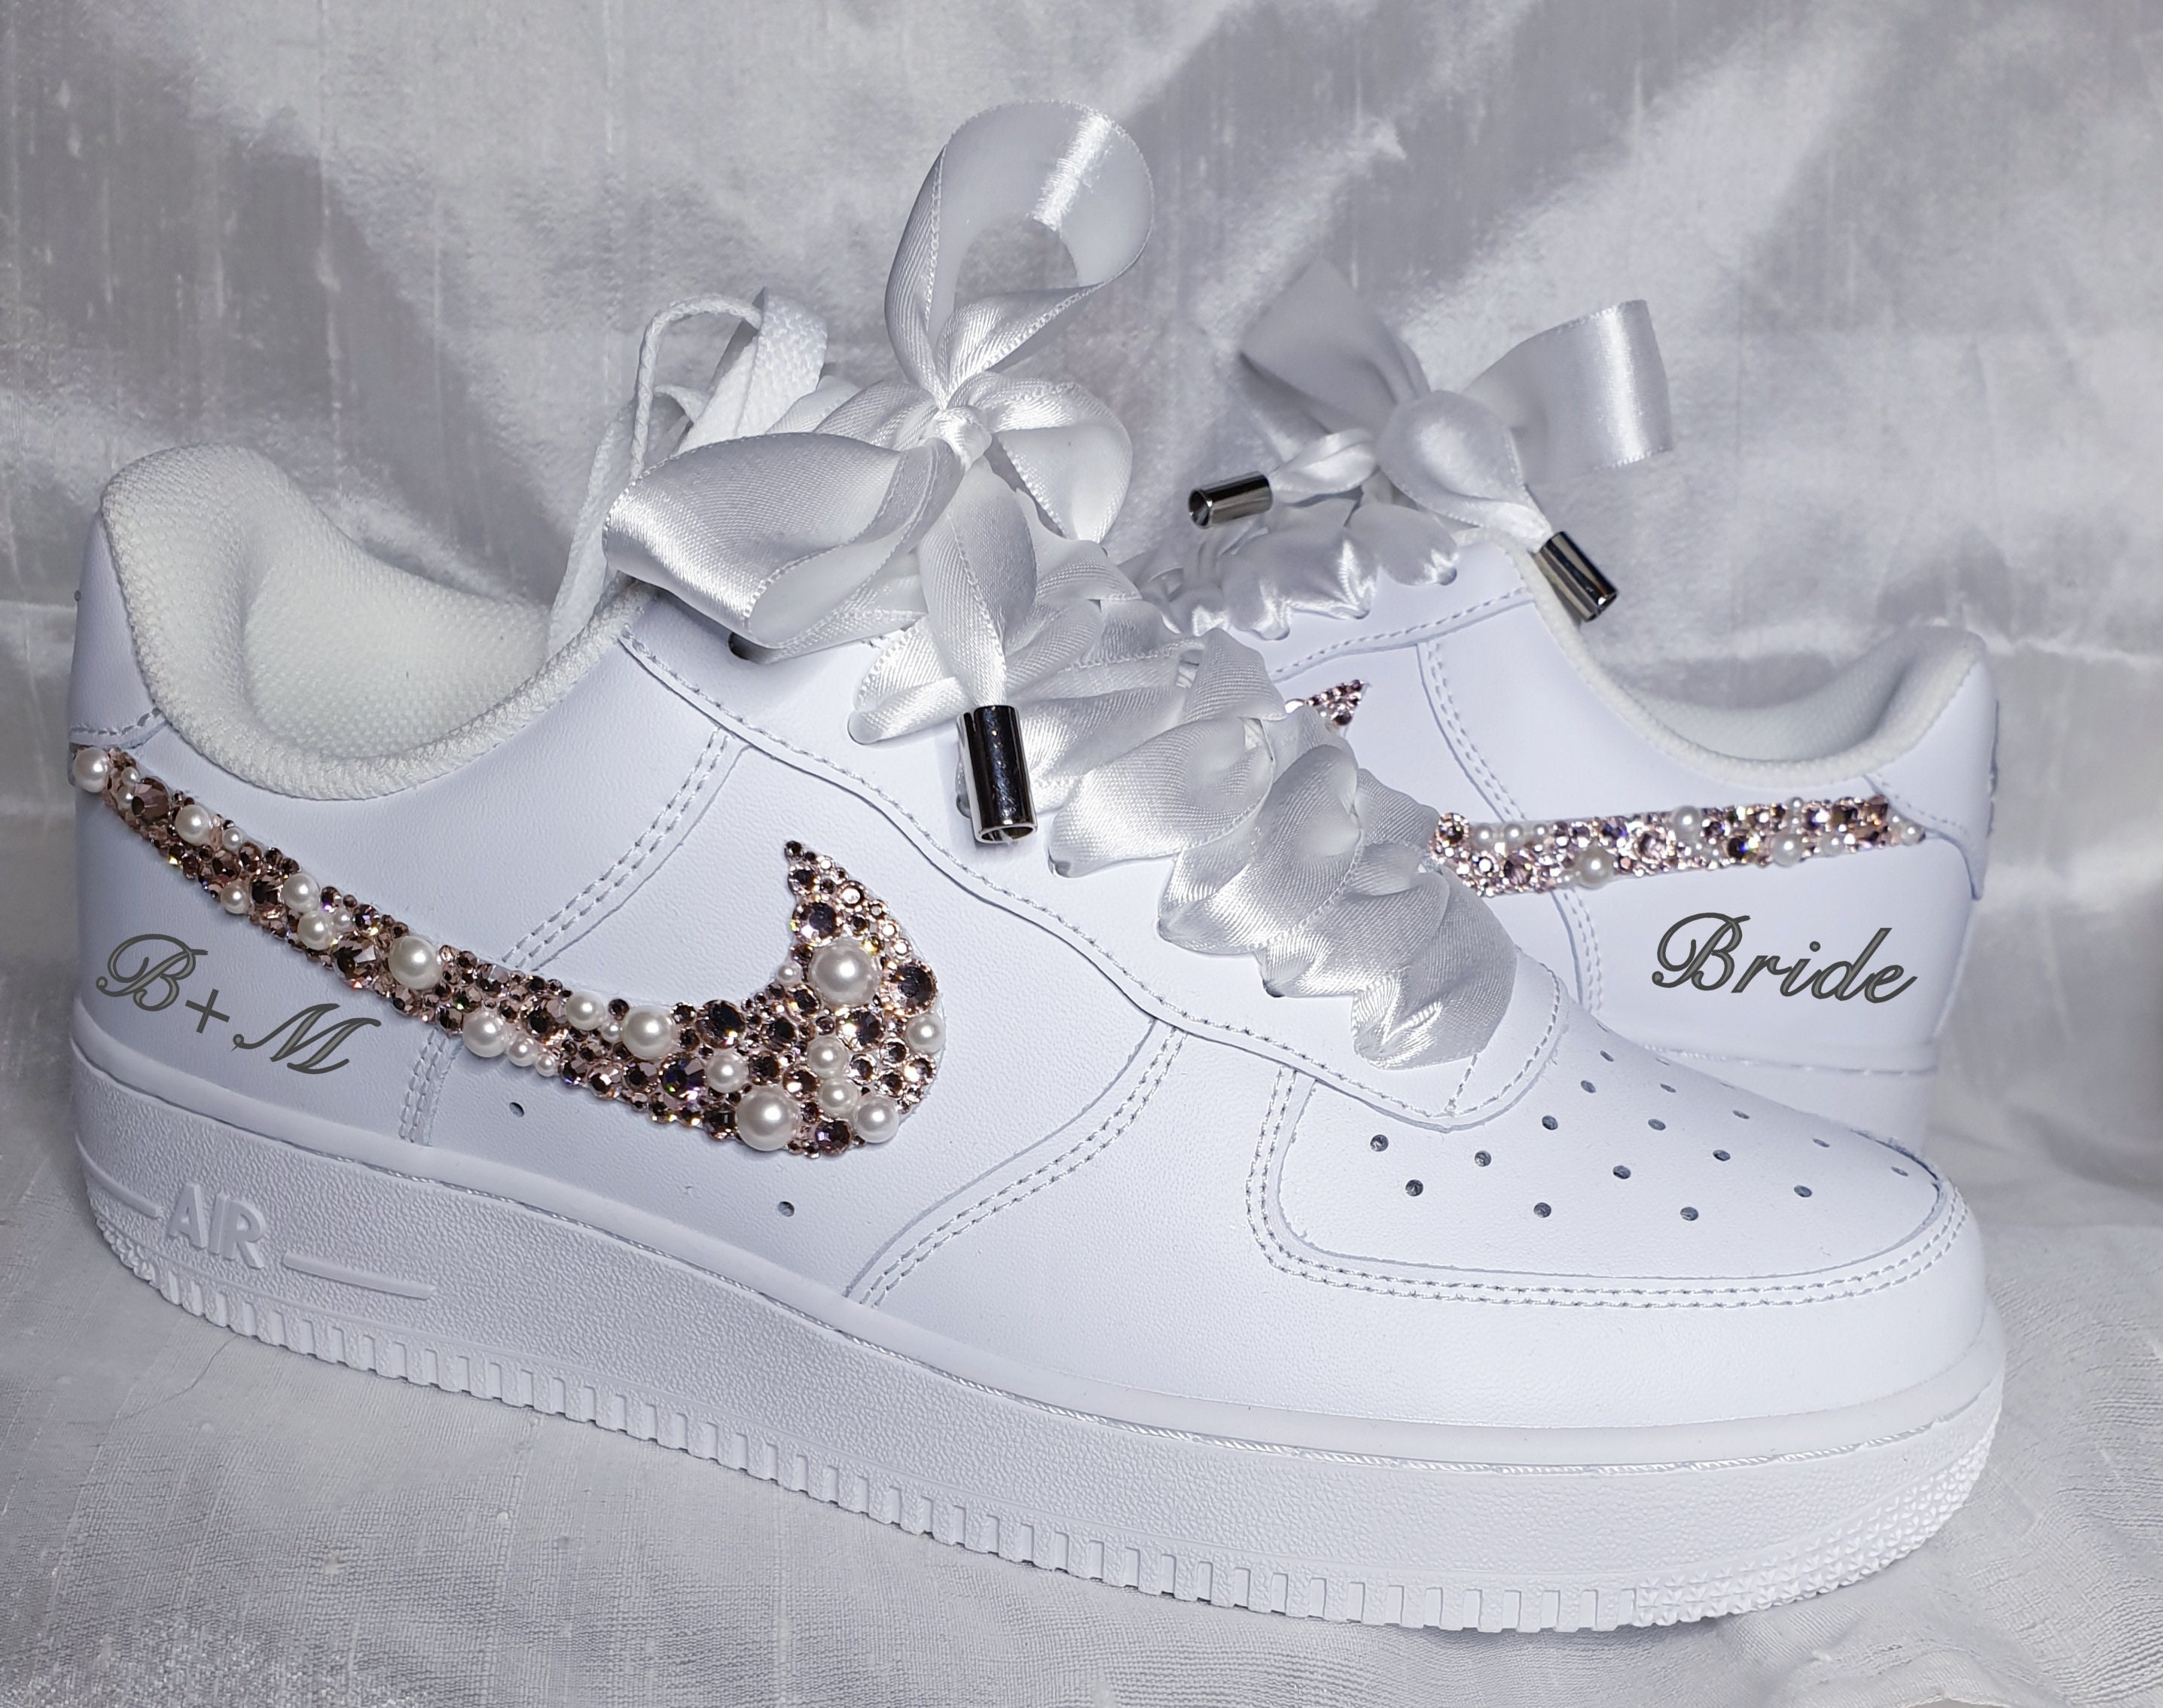 Custom Nike Air Force 1 AF1 Bridal Wedding Shoes Swarovski Crystals Pearls  Rhinestone Personalized Name Date Satin Laces White Comfort Dance - Etsy